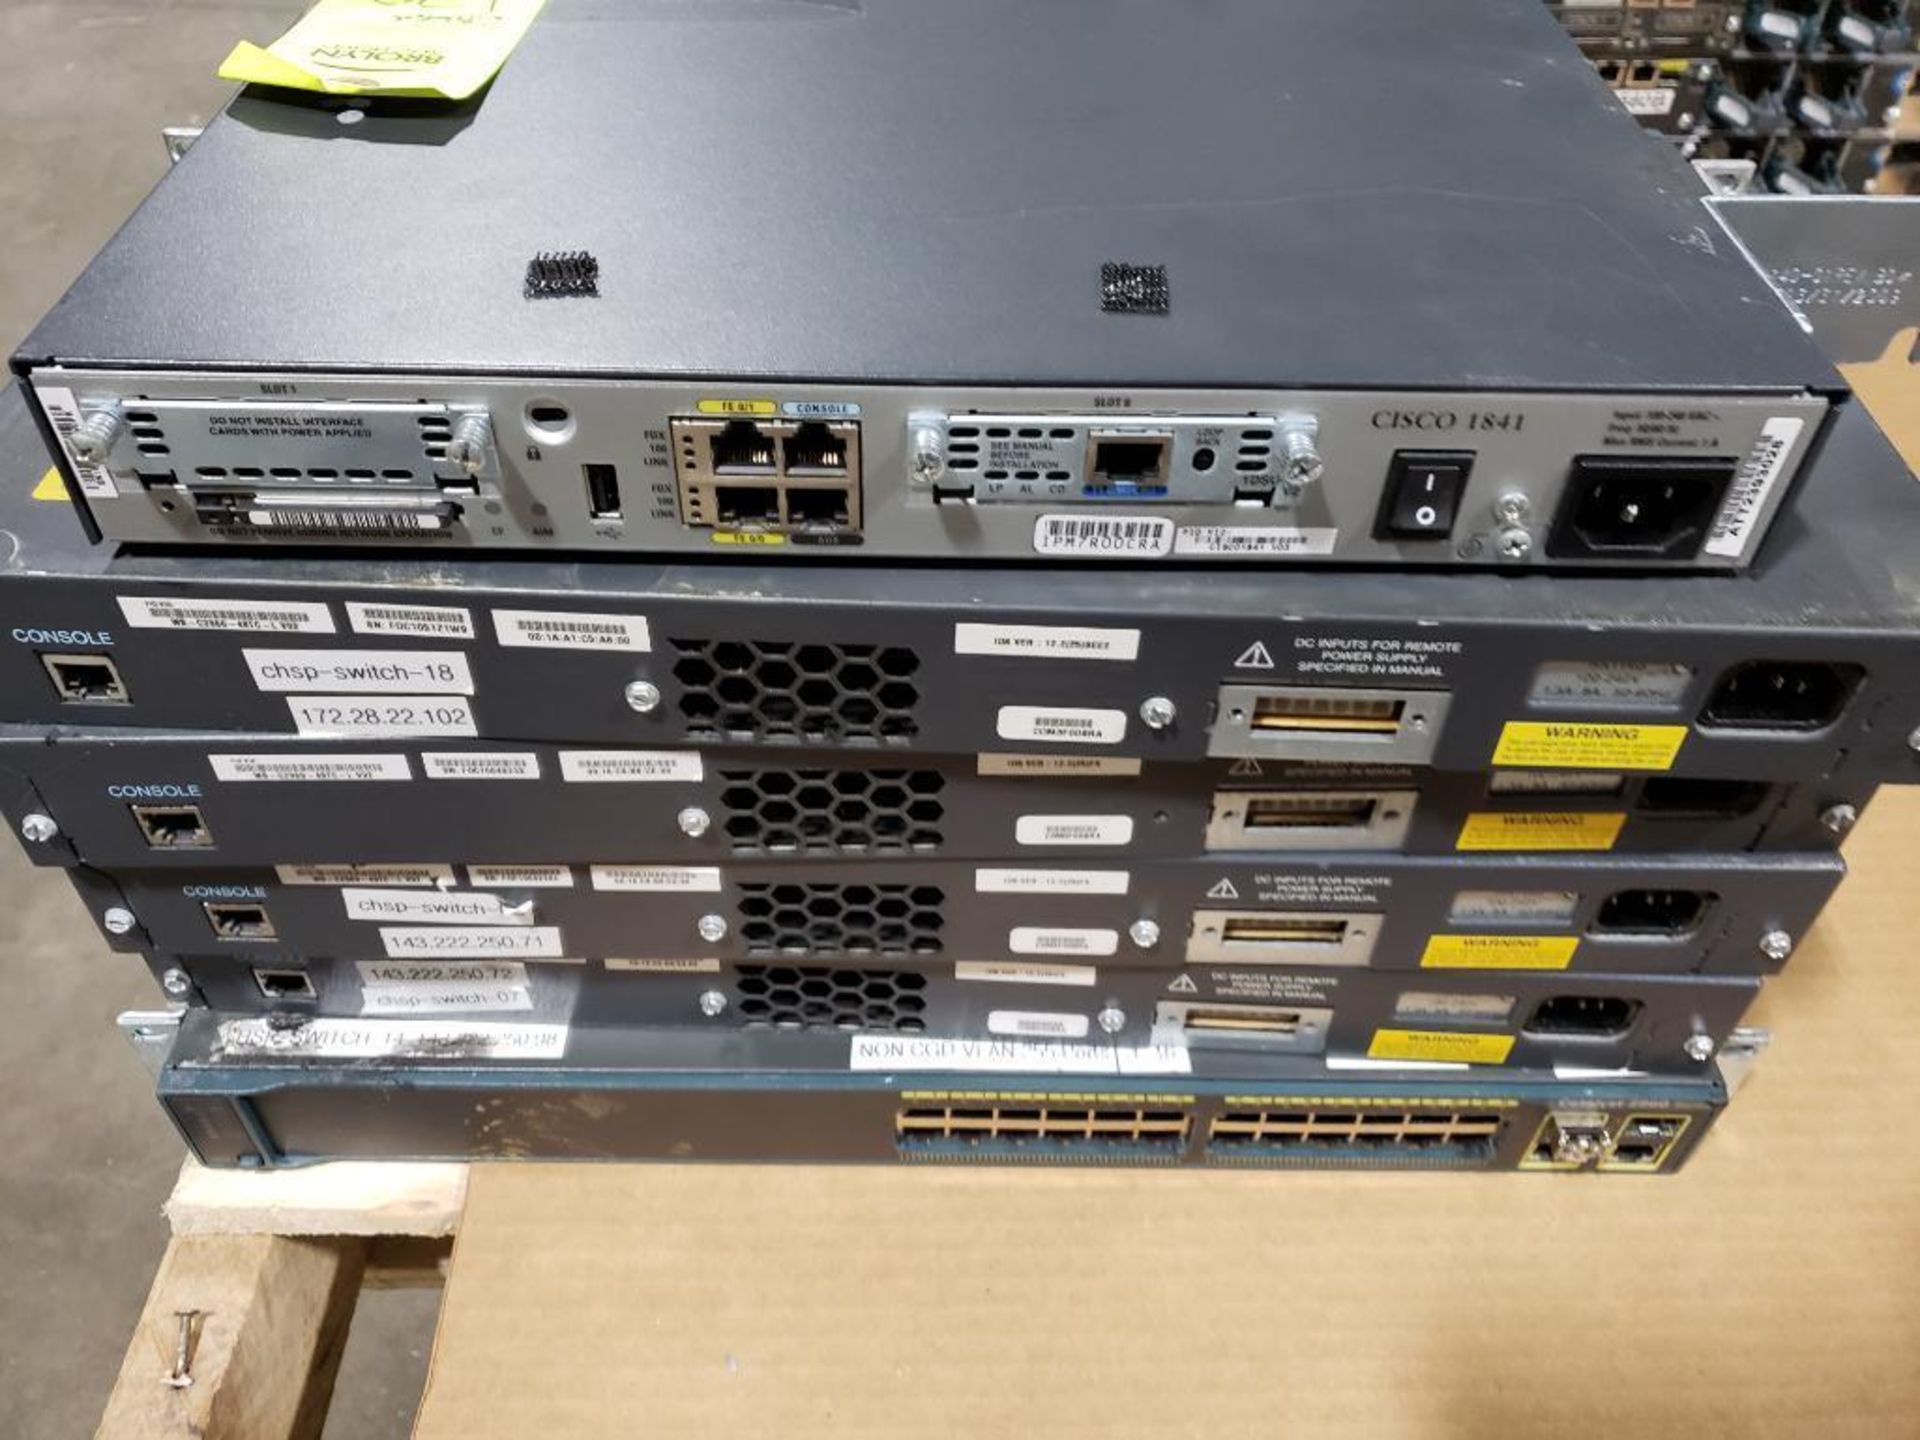 Qty 6 - Assorted Cisco and other networking components. - Image 8 of 8